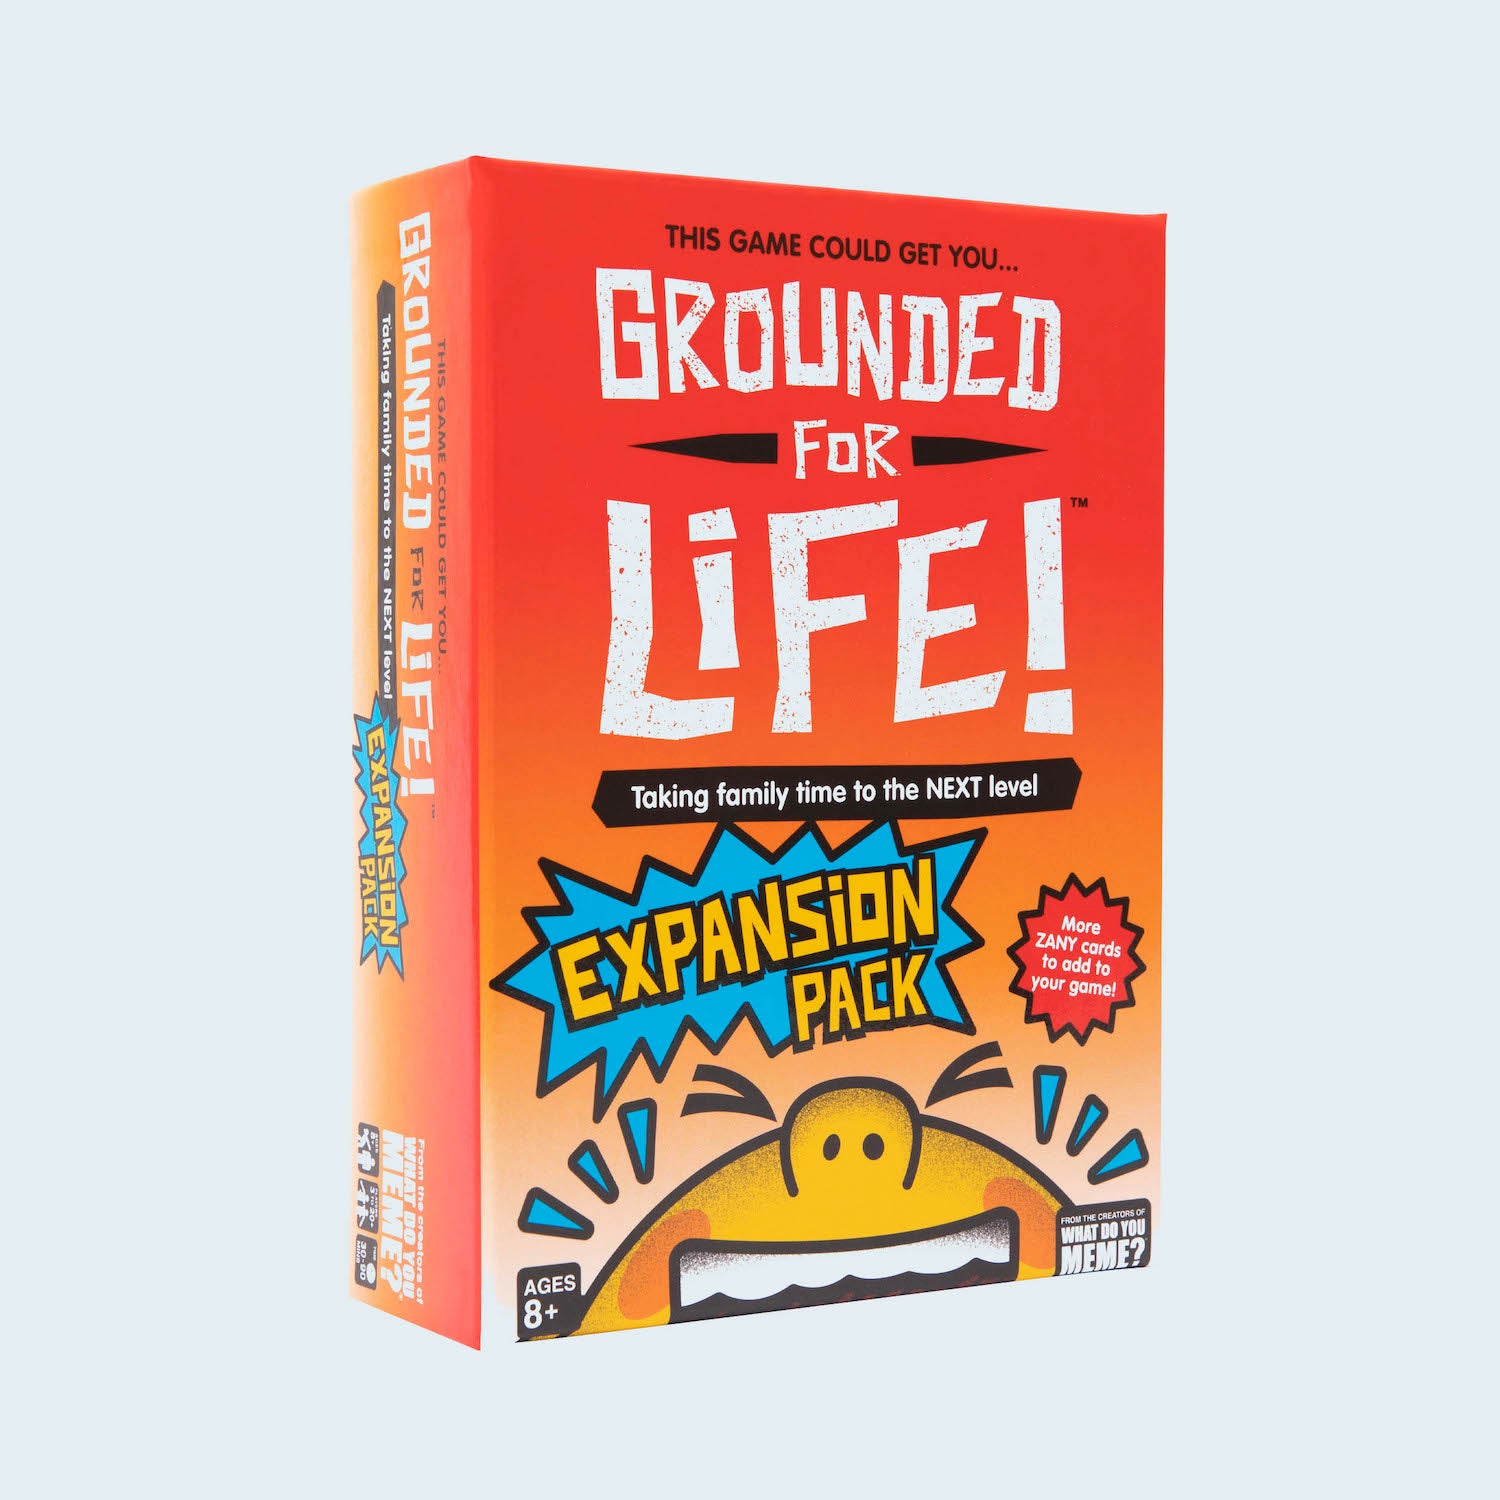 grounded-for-life-expansion-pack-game-box-and-game-play-01-what-do-you-meme-by-relatable